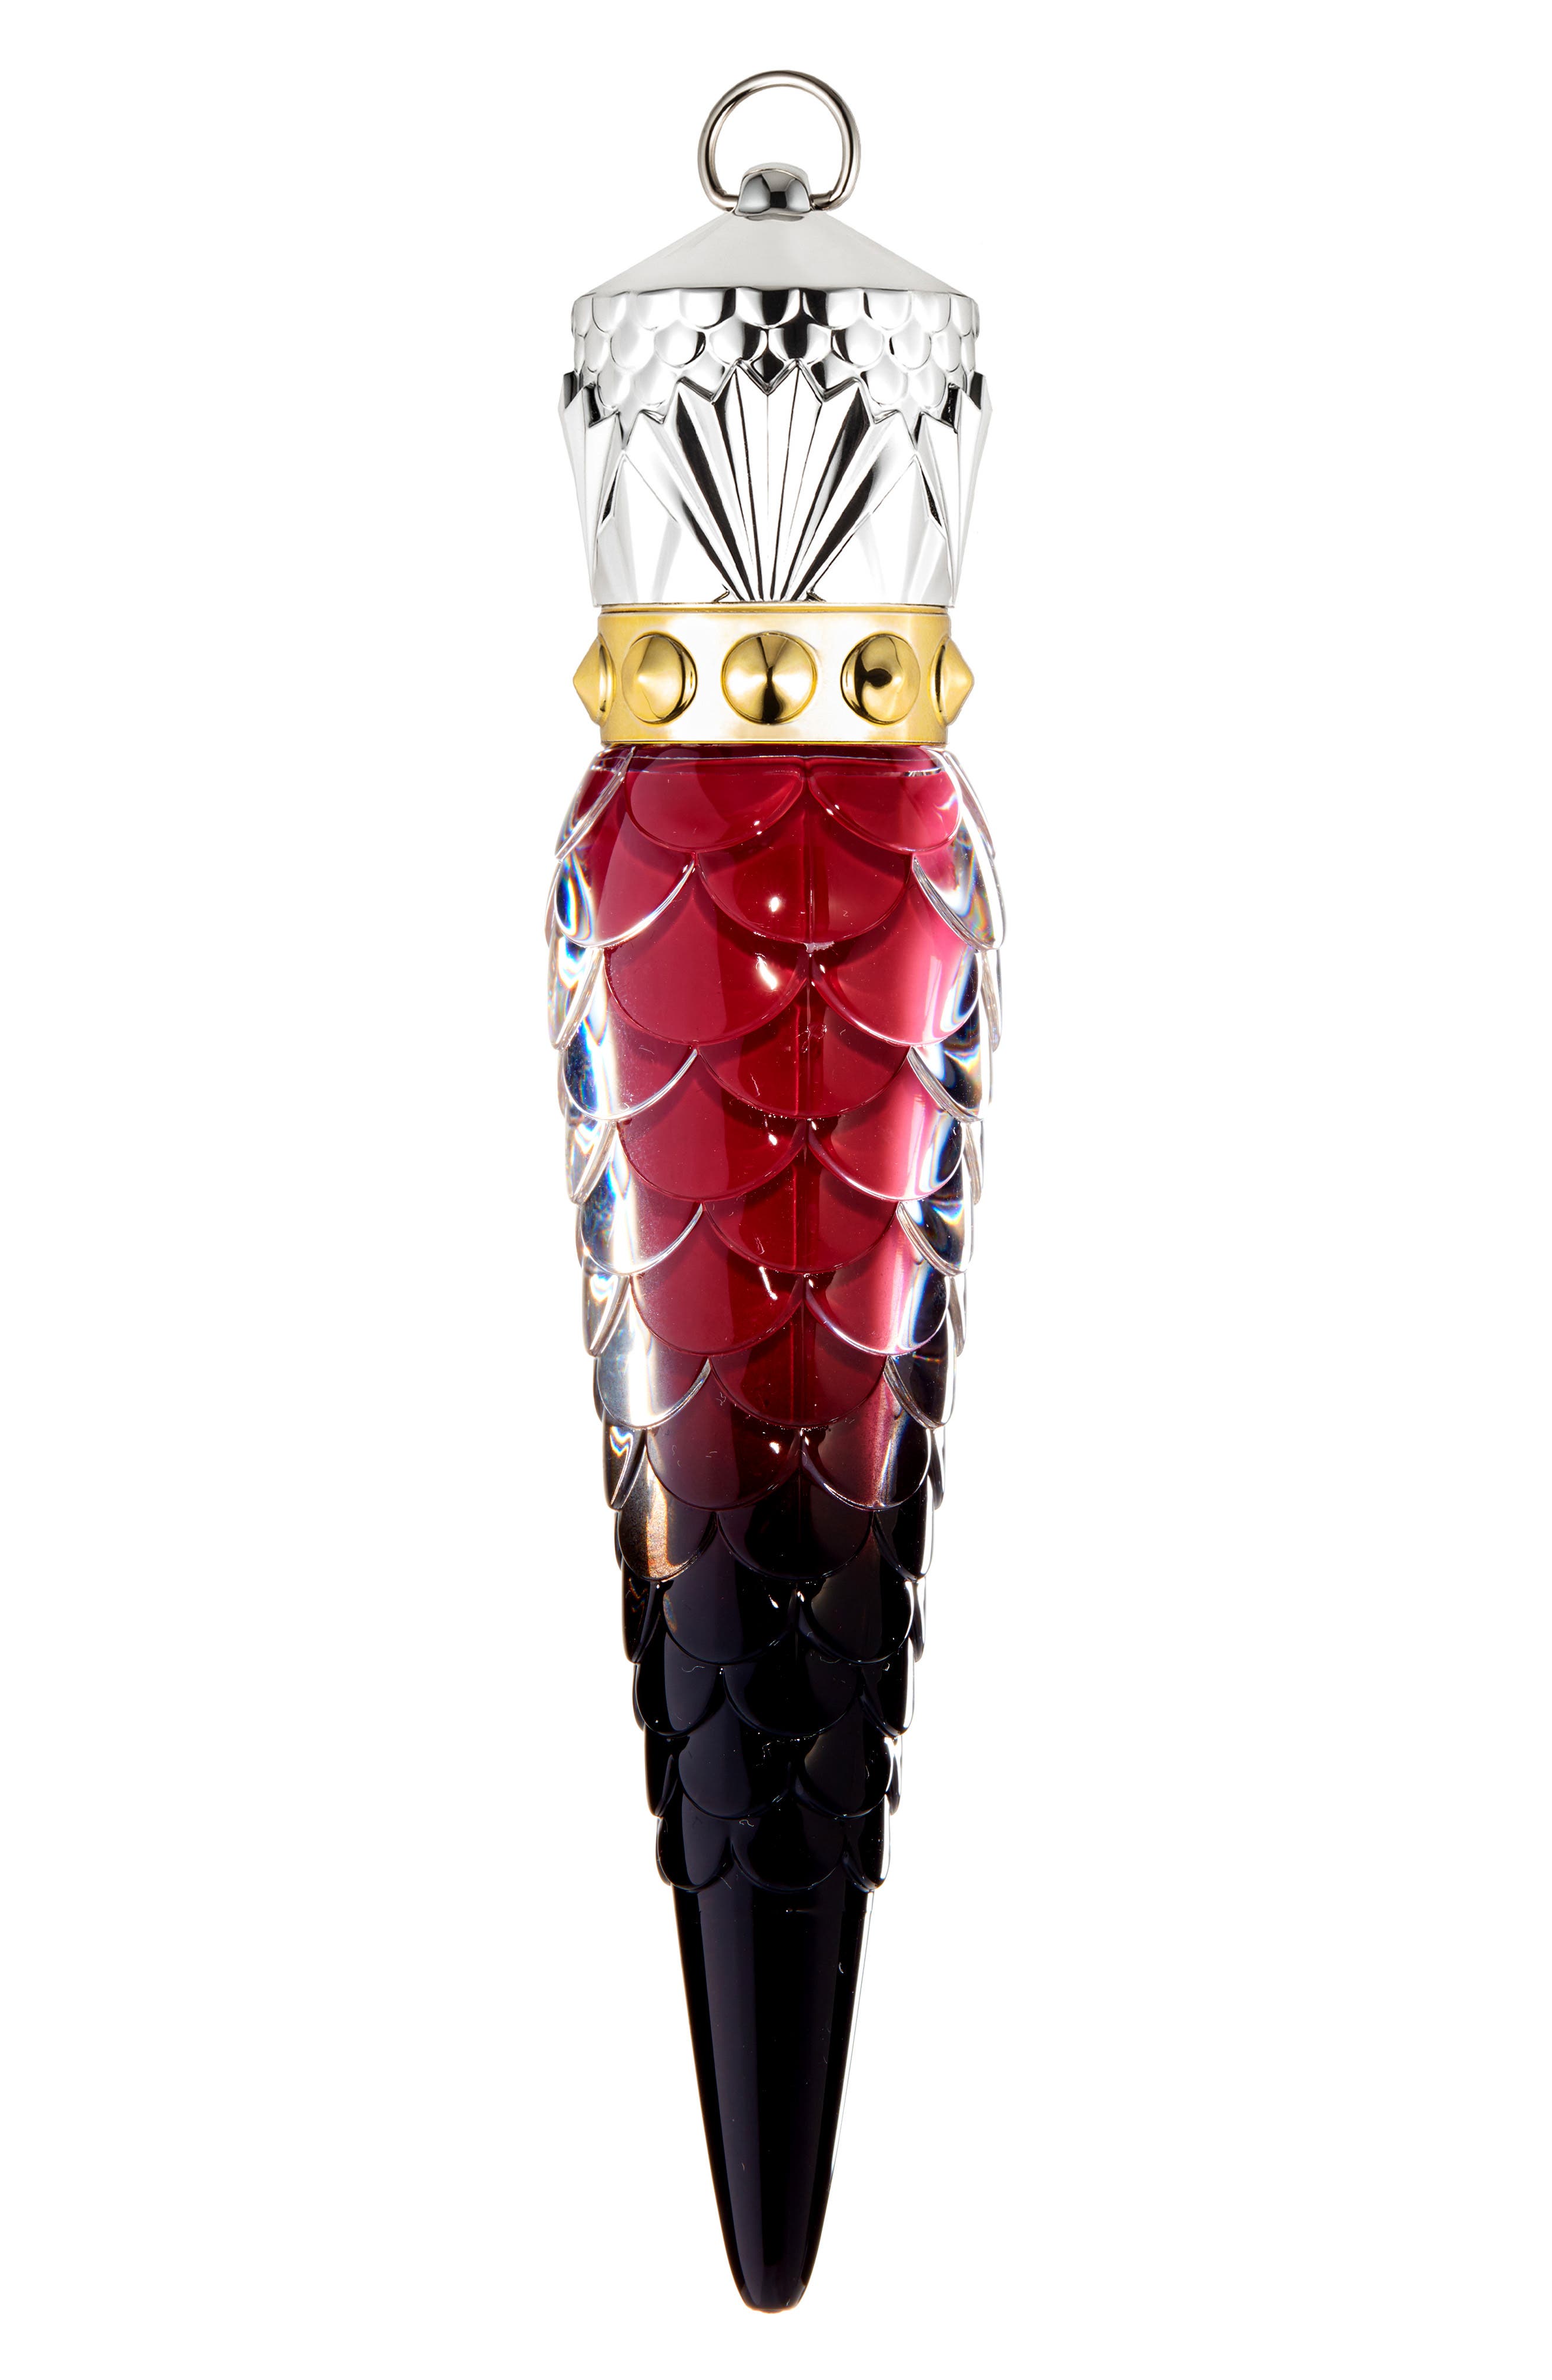 Christian Louboutin Matte Fluid Lip Color in Ma Gil /Matte at Nordstrom